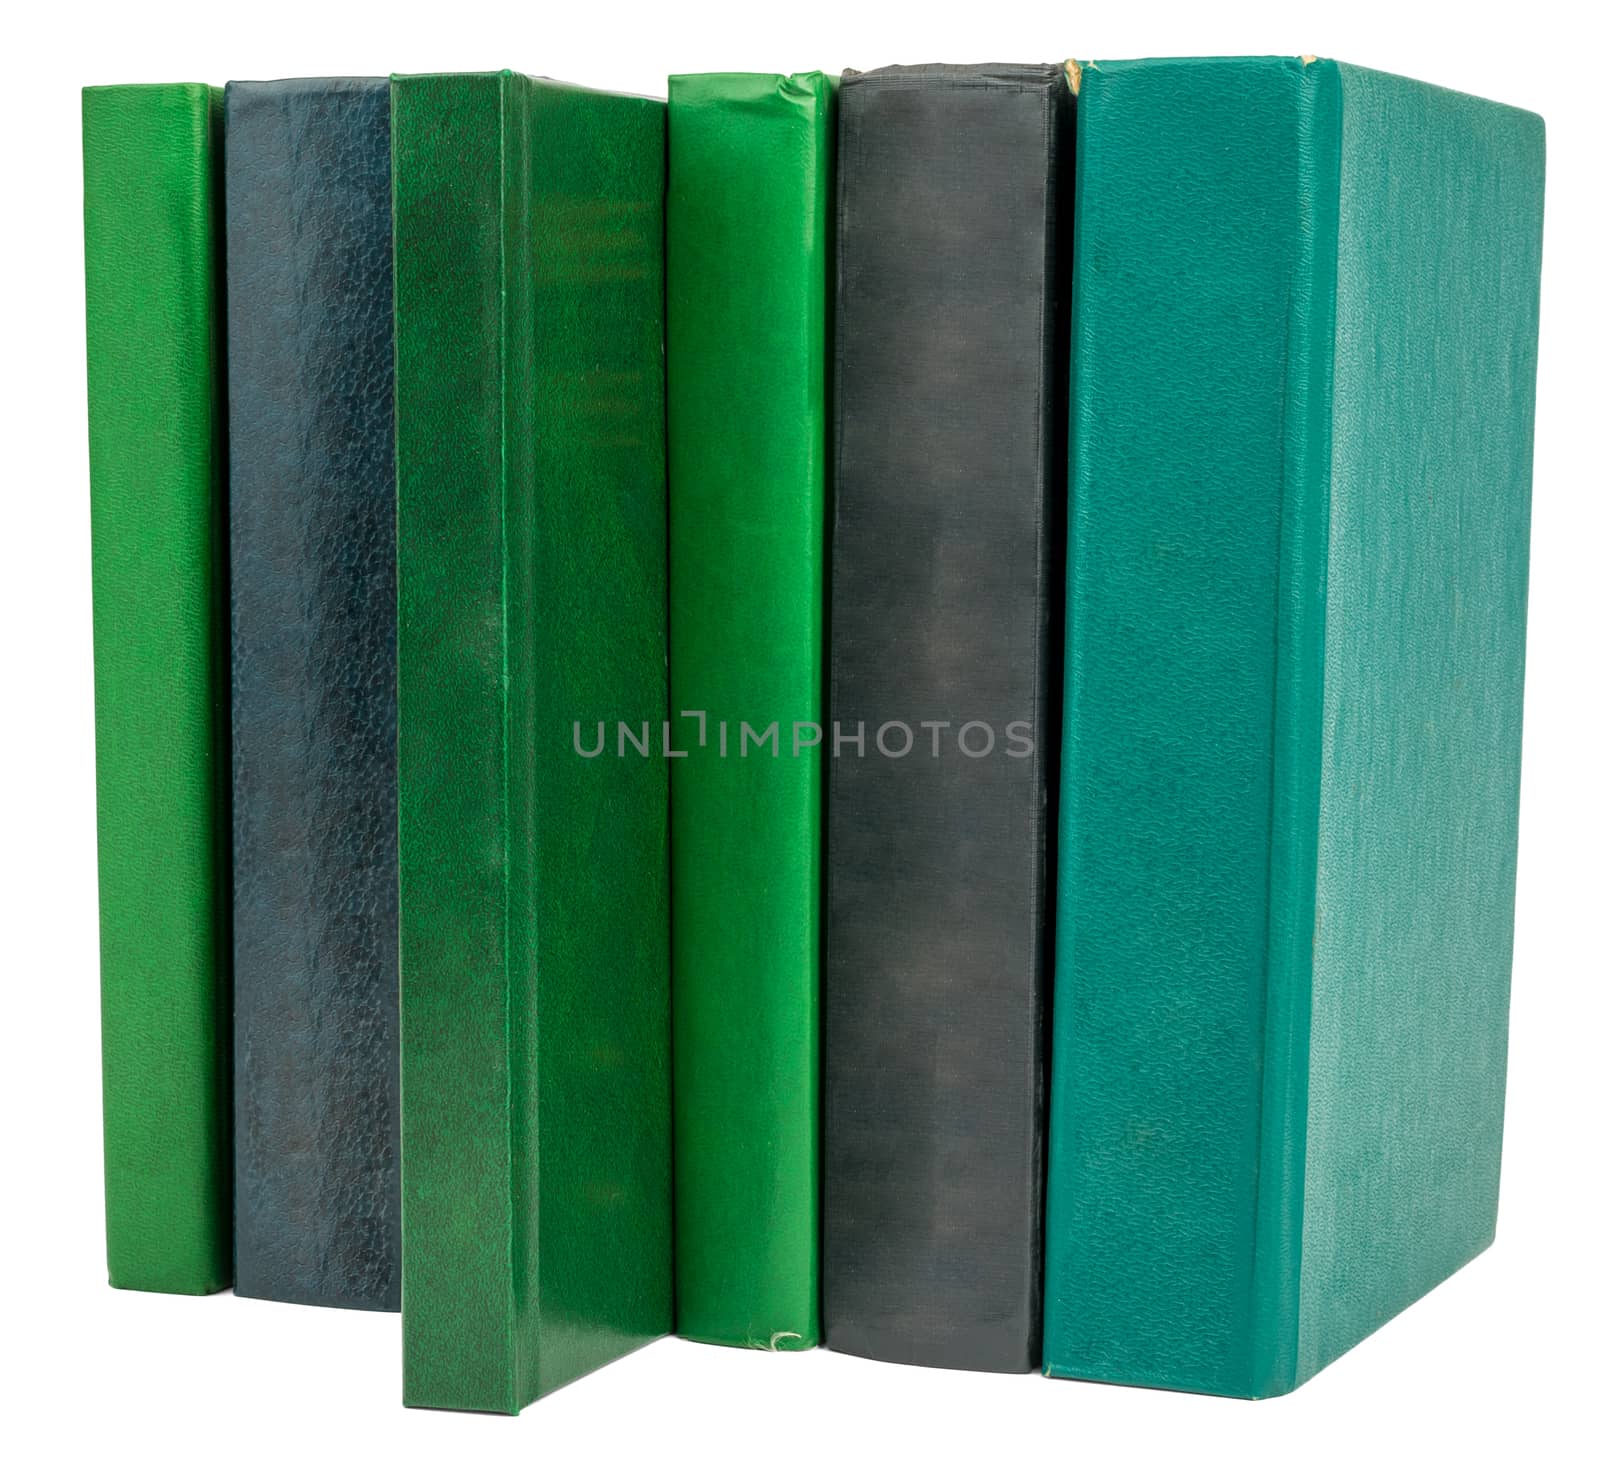 Book set isolated on white background, closeup